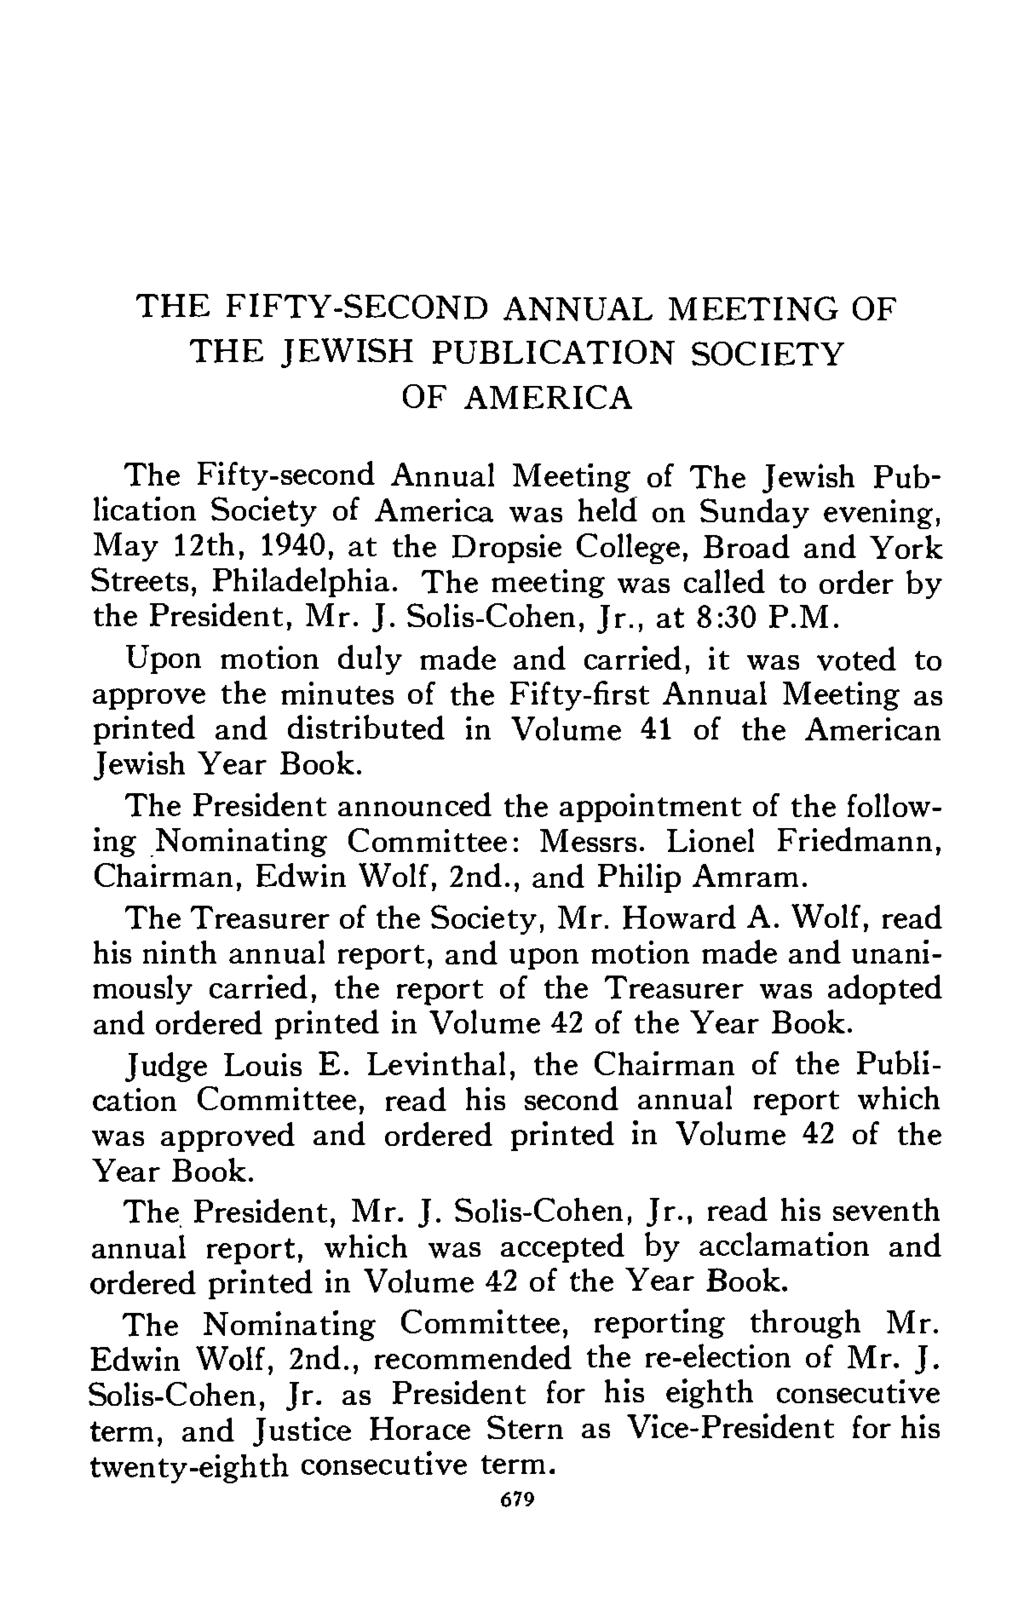 THE FIFTY-SECOND ANNUAL MEETING OF THE JEWISH PUBLICATION SOCIETY OF AMERICA The Fifty-second Annual Meeting of The Jewish Publication Society of America was held on Sunday evening, May 12th, 1940,